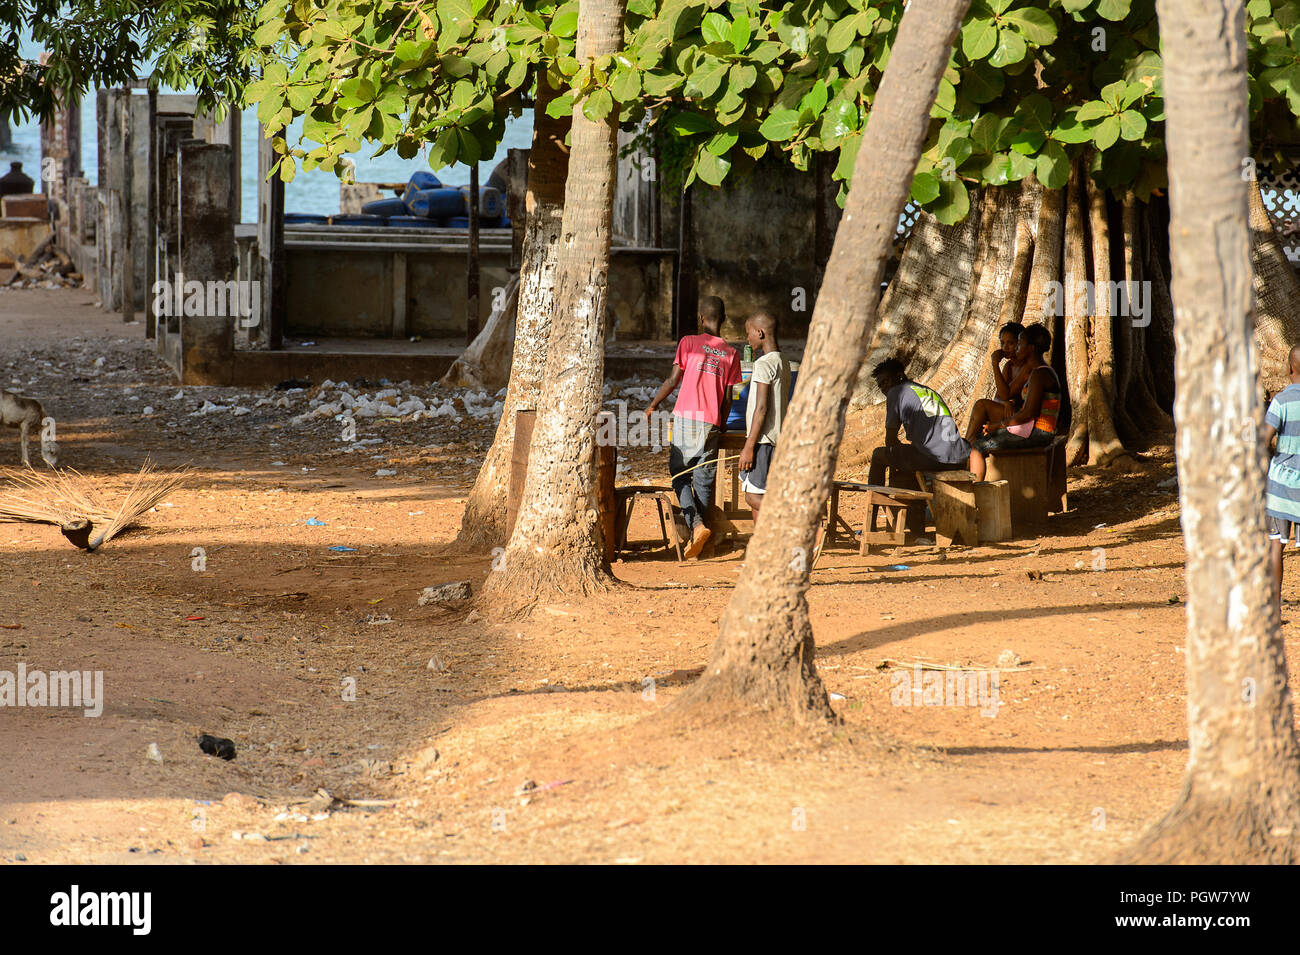 BOLAMA ISLAND, GUINEA BISSAU - MAY 6, 2017: Unidentified local people talk about something in the ghost town of Bolama, the former capital of Portugue Stock Photo